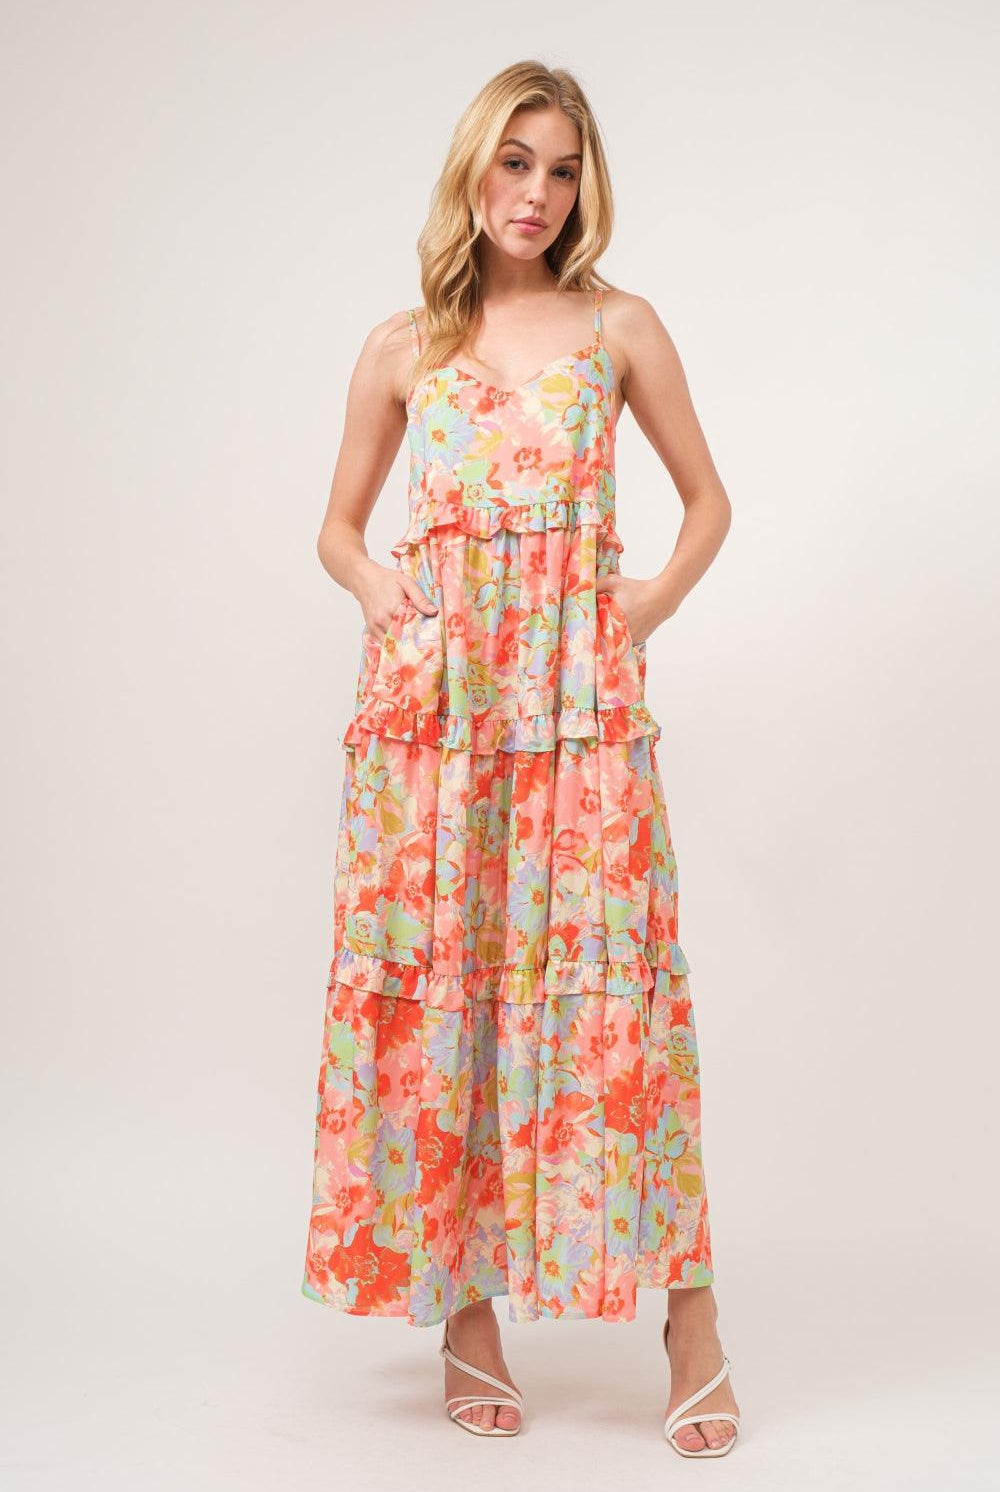 Women's Dresses And The Why Floral Ruffled Tiered Maxi Cami Dress